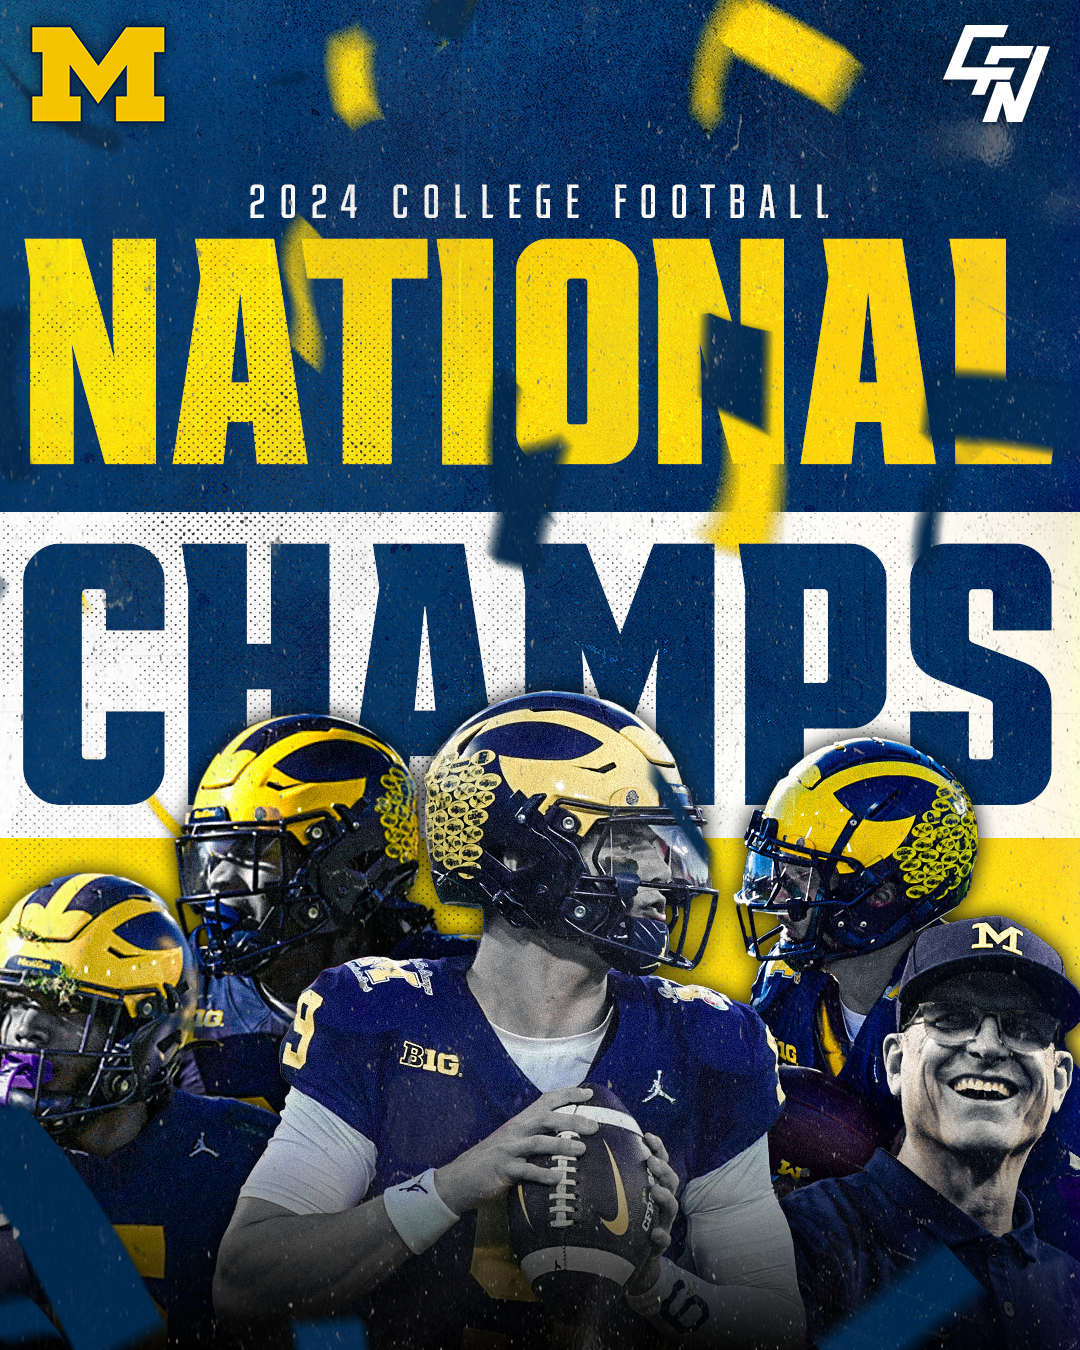 The Michigan Wolverines are National Champions!